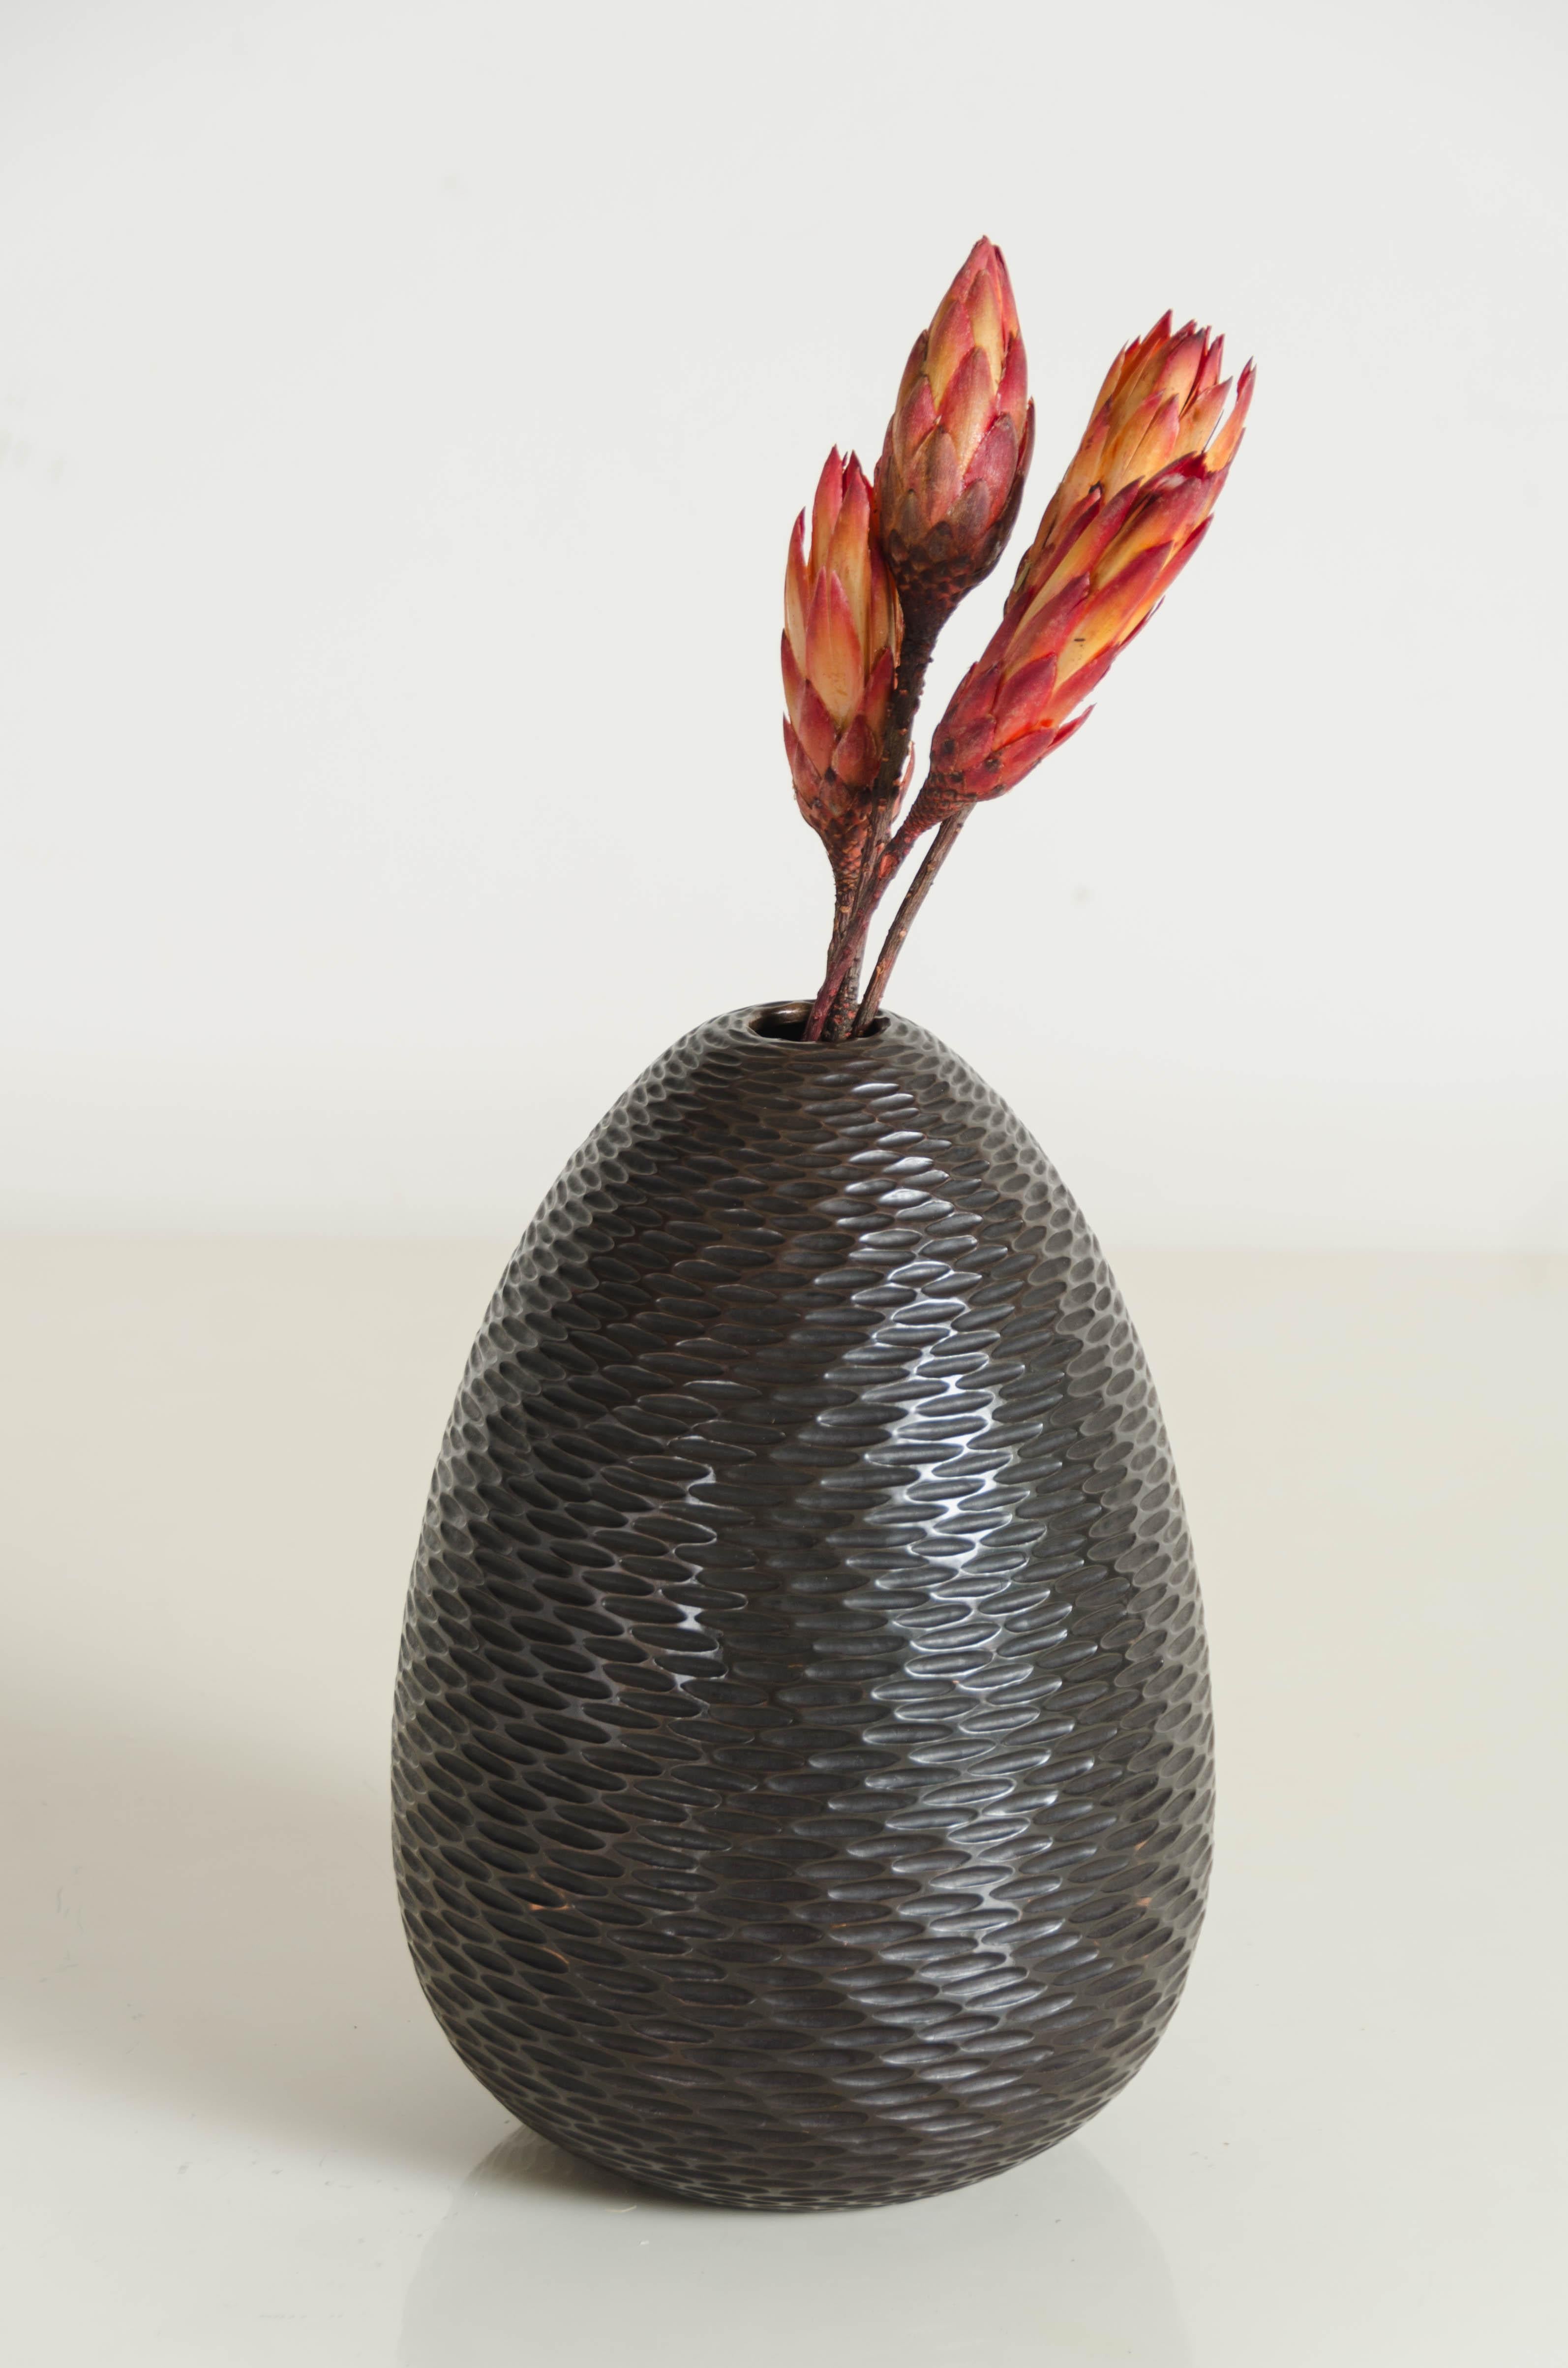 Pino vase
Antique copper finish
Hand repousse
Limited Edition

Repoussé is the traditional art of hand-hammering decorative relief onto sheet
metal. The technique originated around 800 BC between Asia and Europe and in
Chinese historical